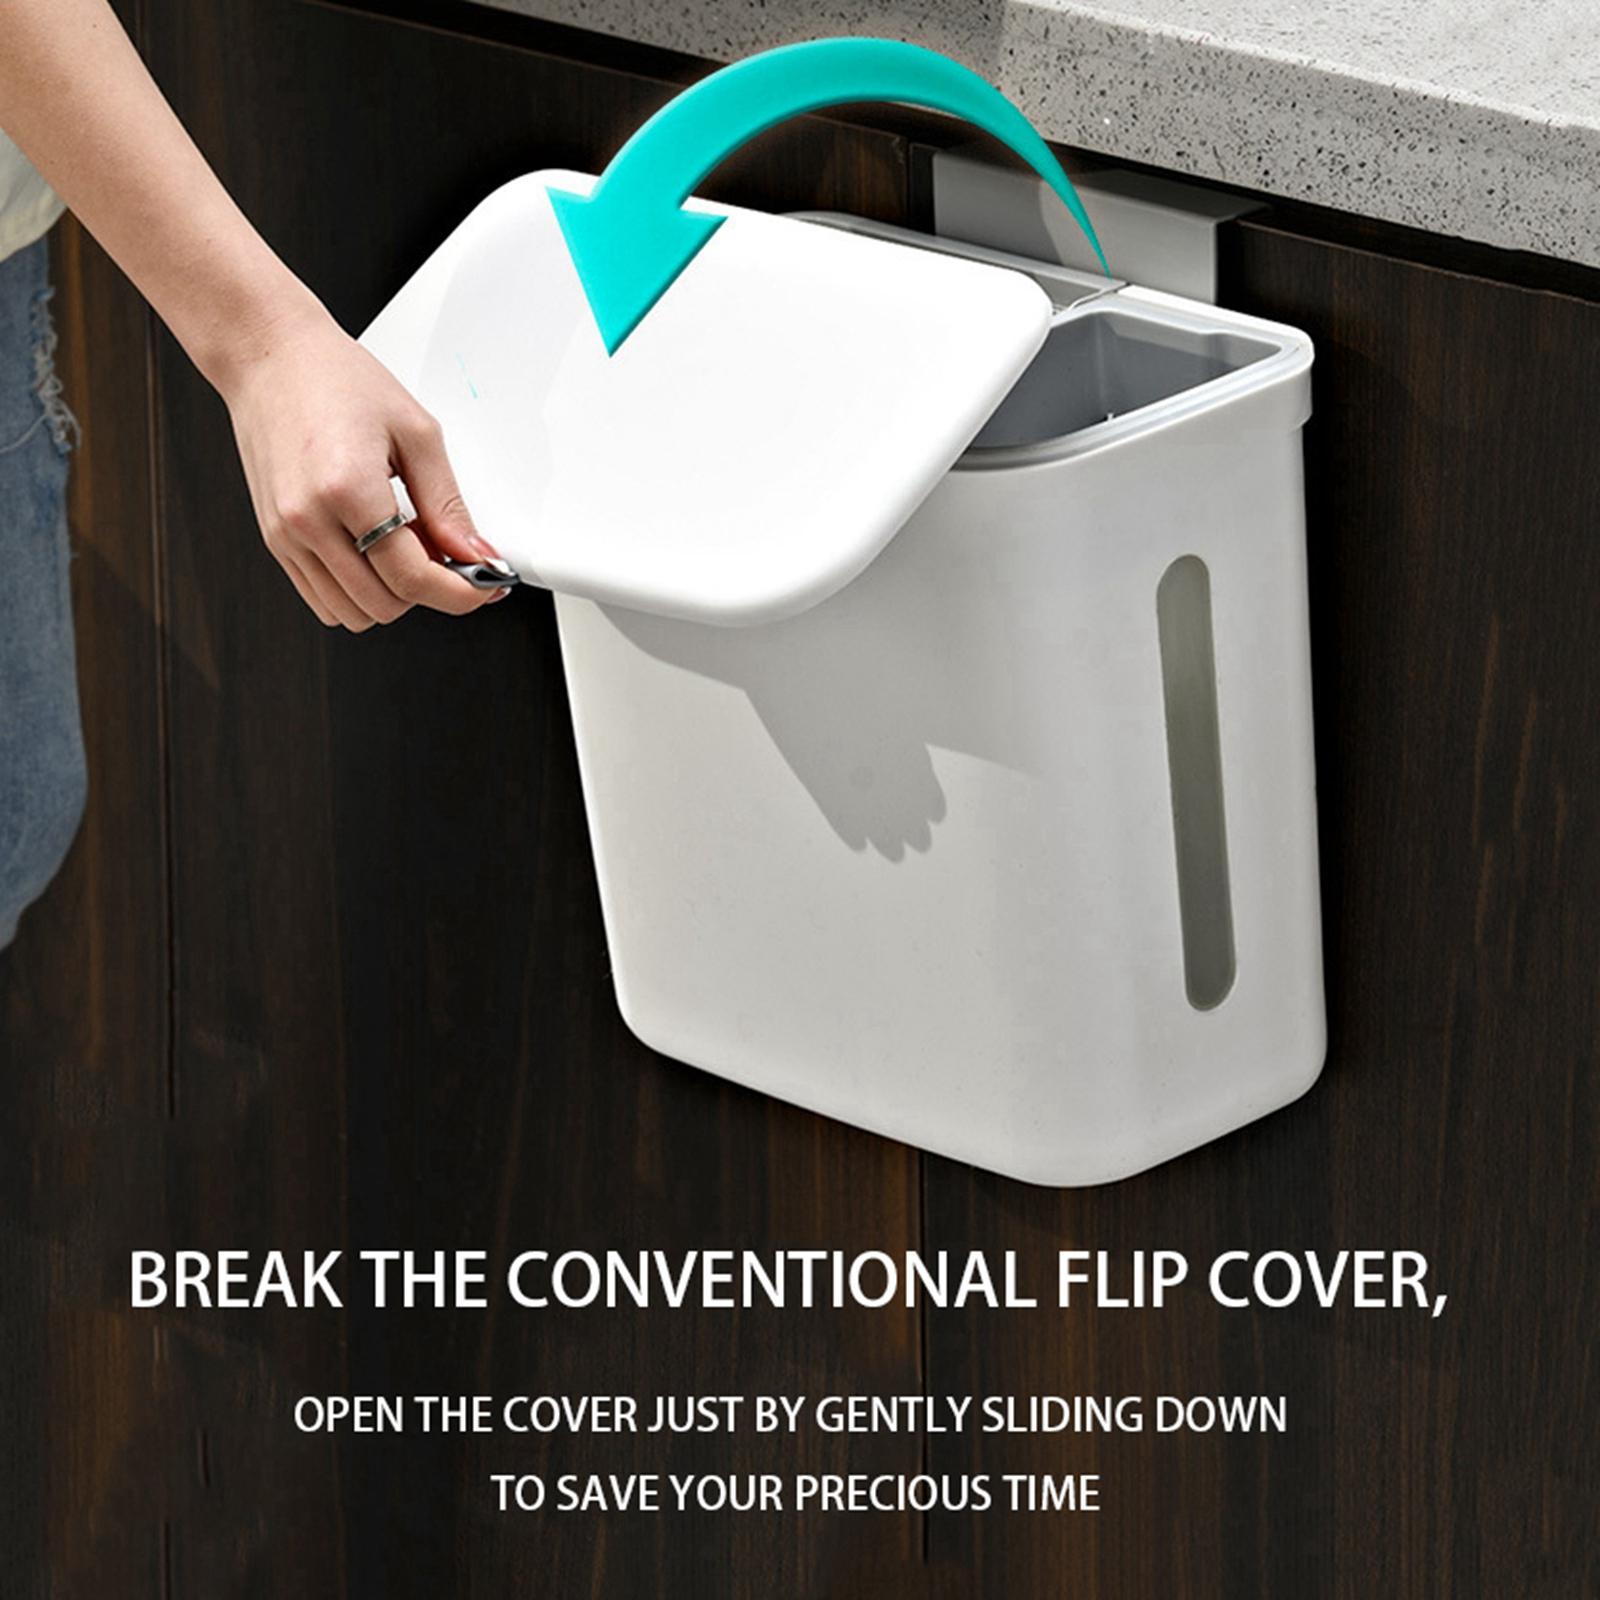 9L Hanging Trash Can with Wet and Dry Compartment